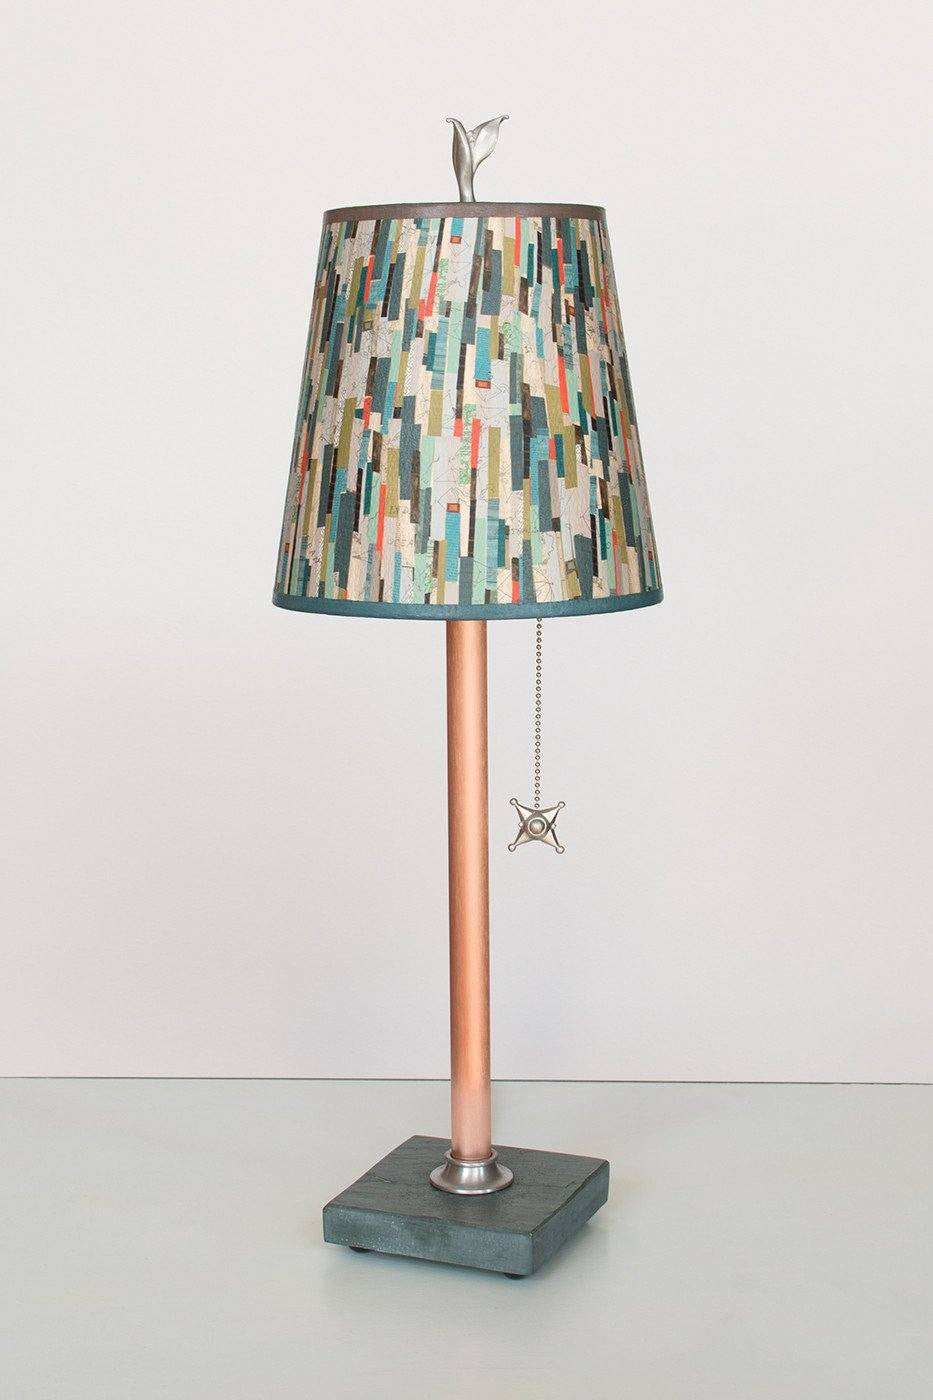 Janna Ugone & Co Table Lamps Copper Table Lamp with Small Drum Shade in Papers